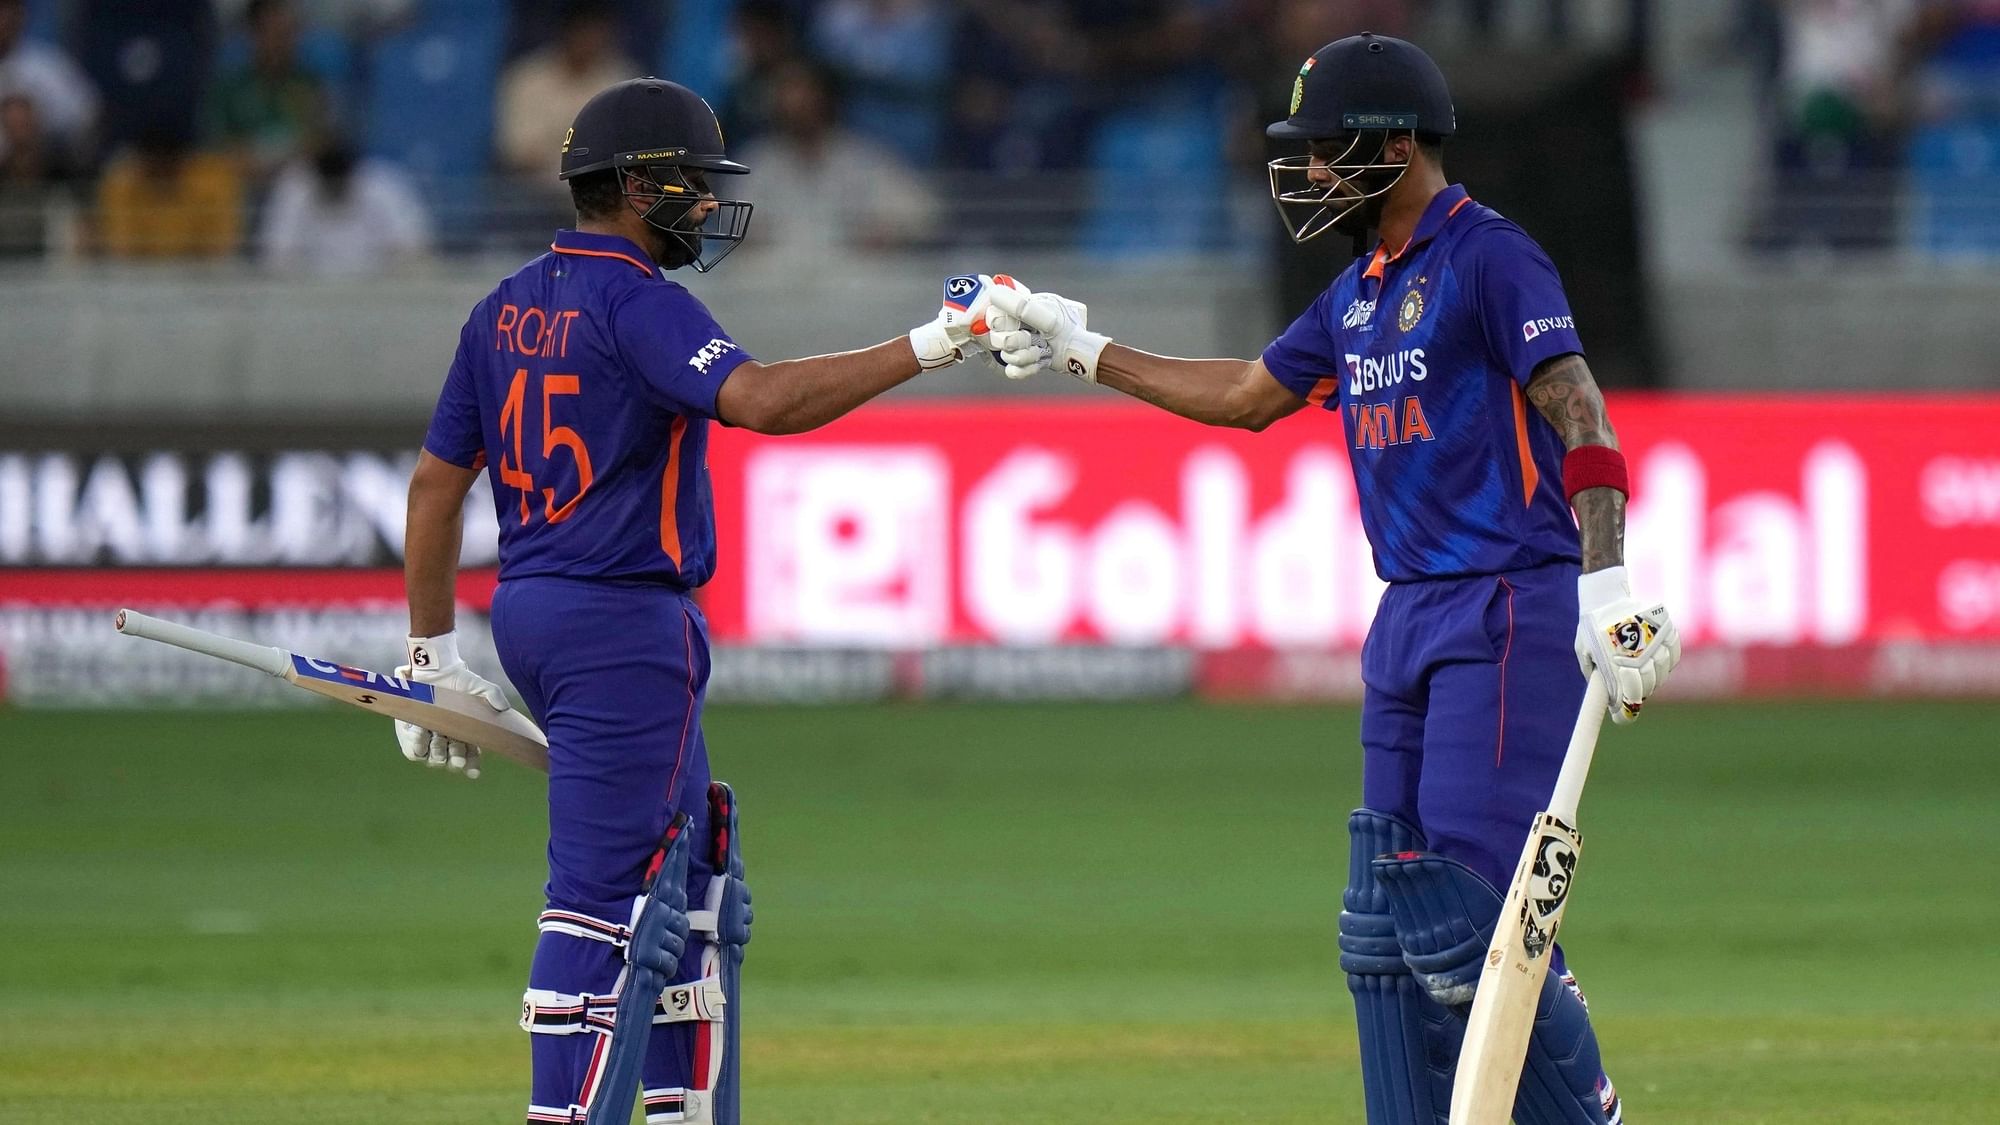 Pakistan vs Sri Lanka Live Streaming Todays Match of Asia Cup 2023, Where and How to Watch the Live Telecast of Pak vs SL Cricket Match